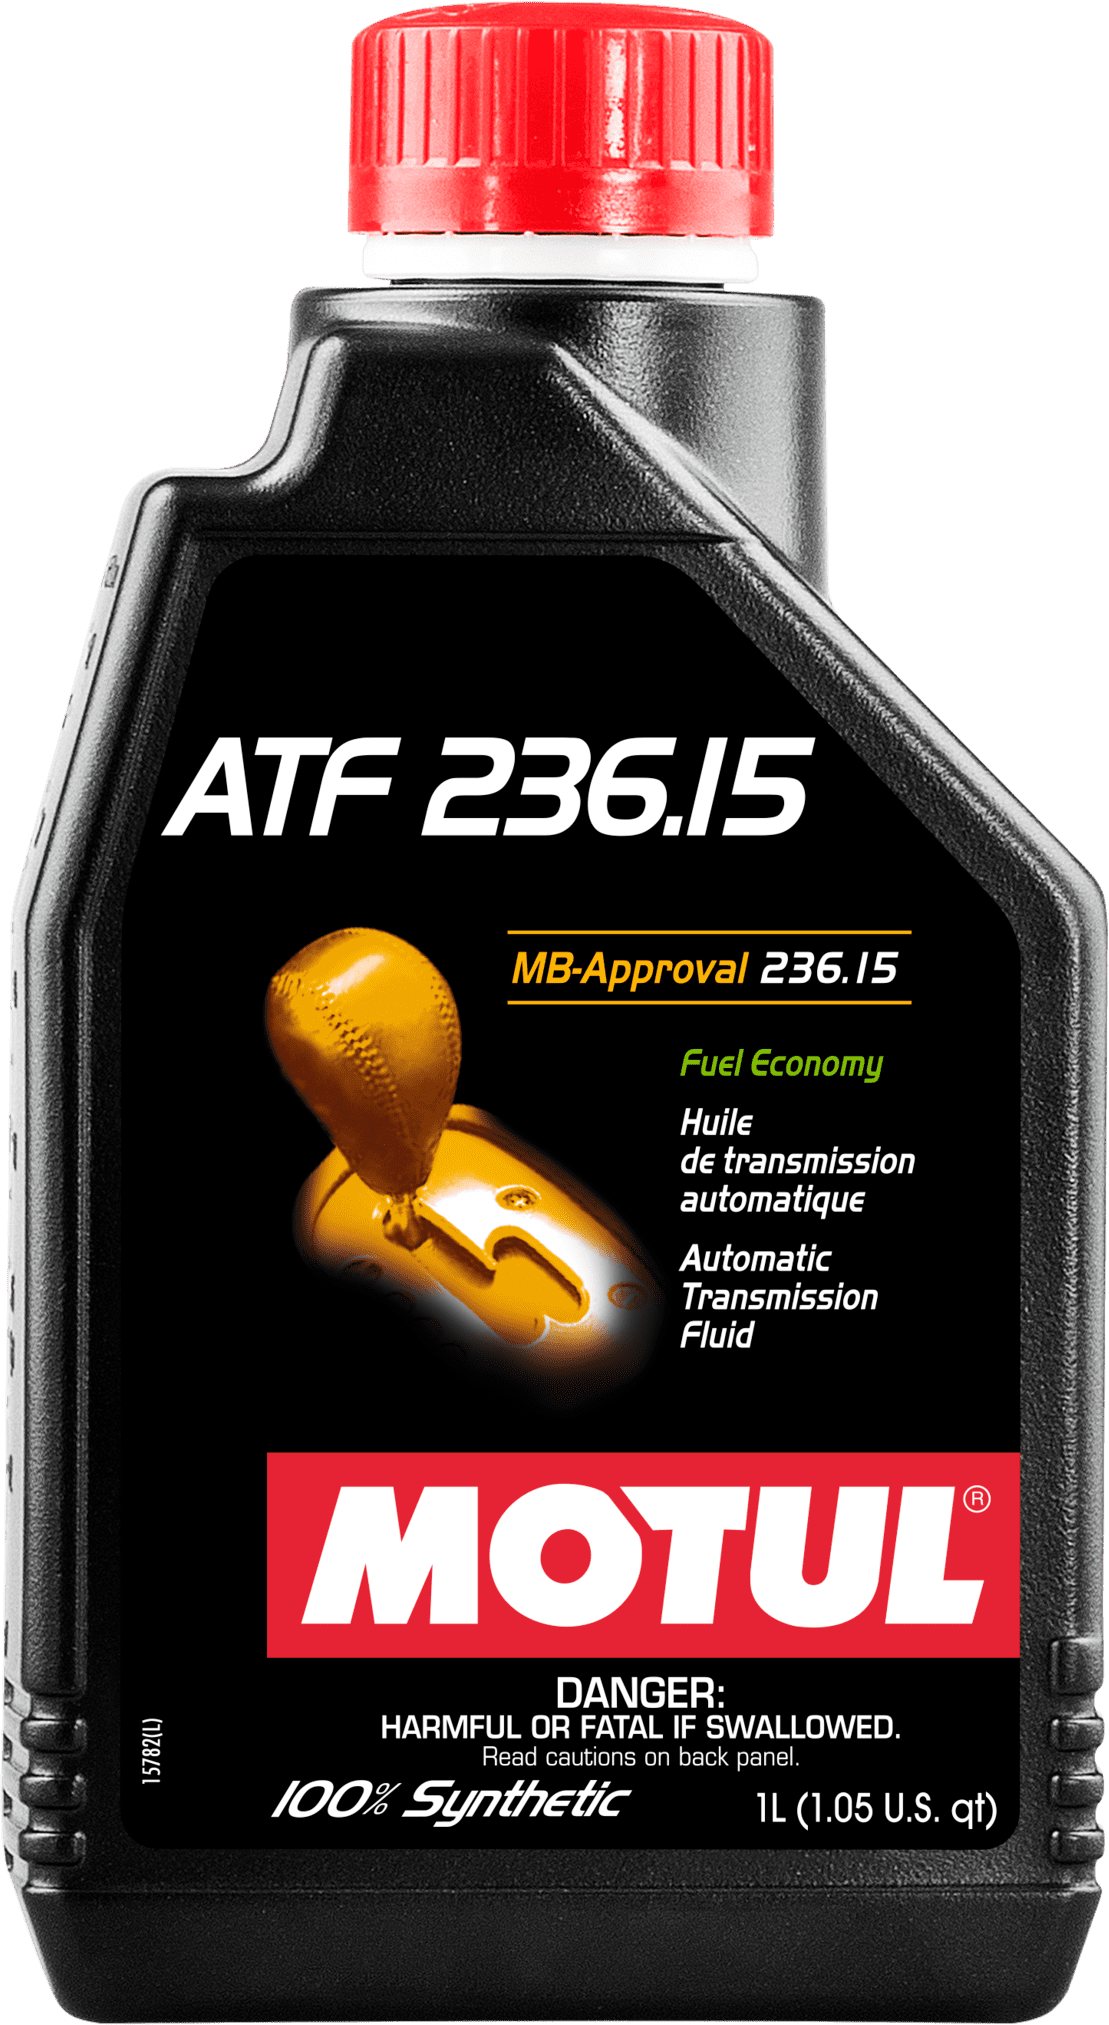 106954-1 100% Synthetic transmission fluid.